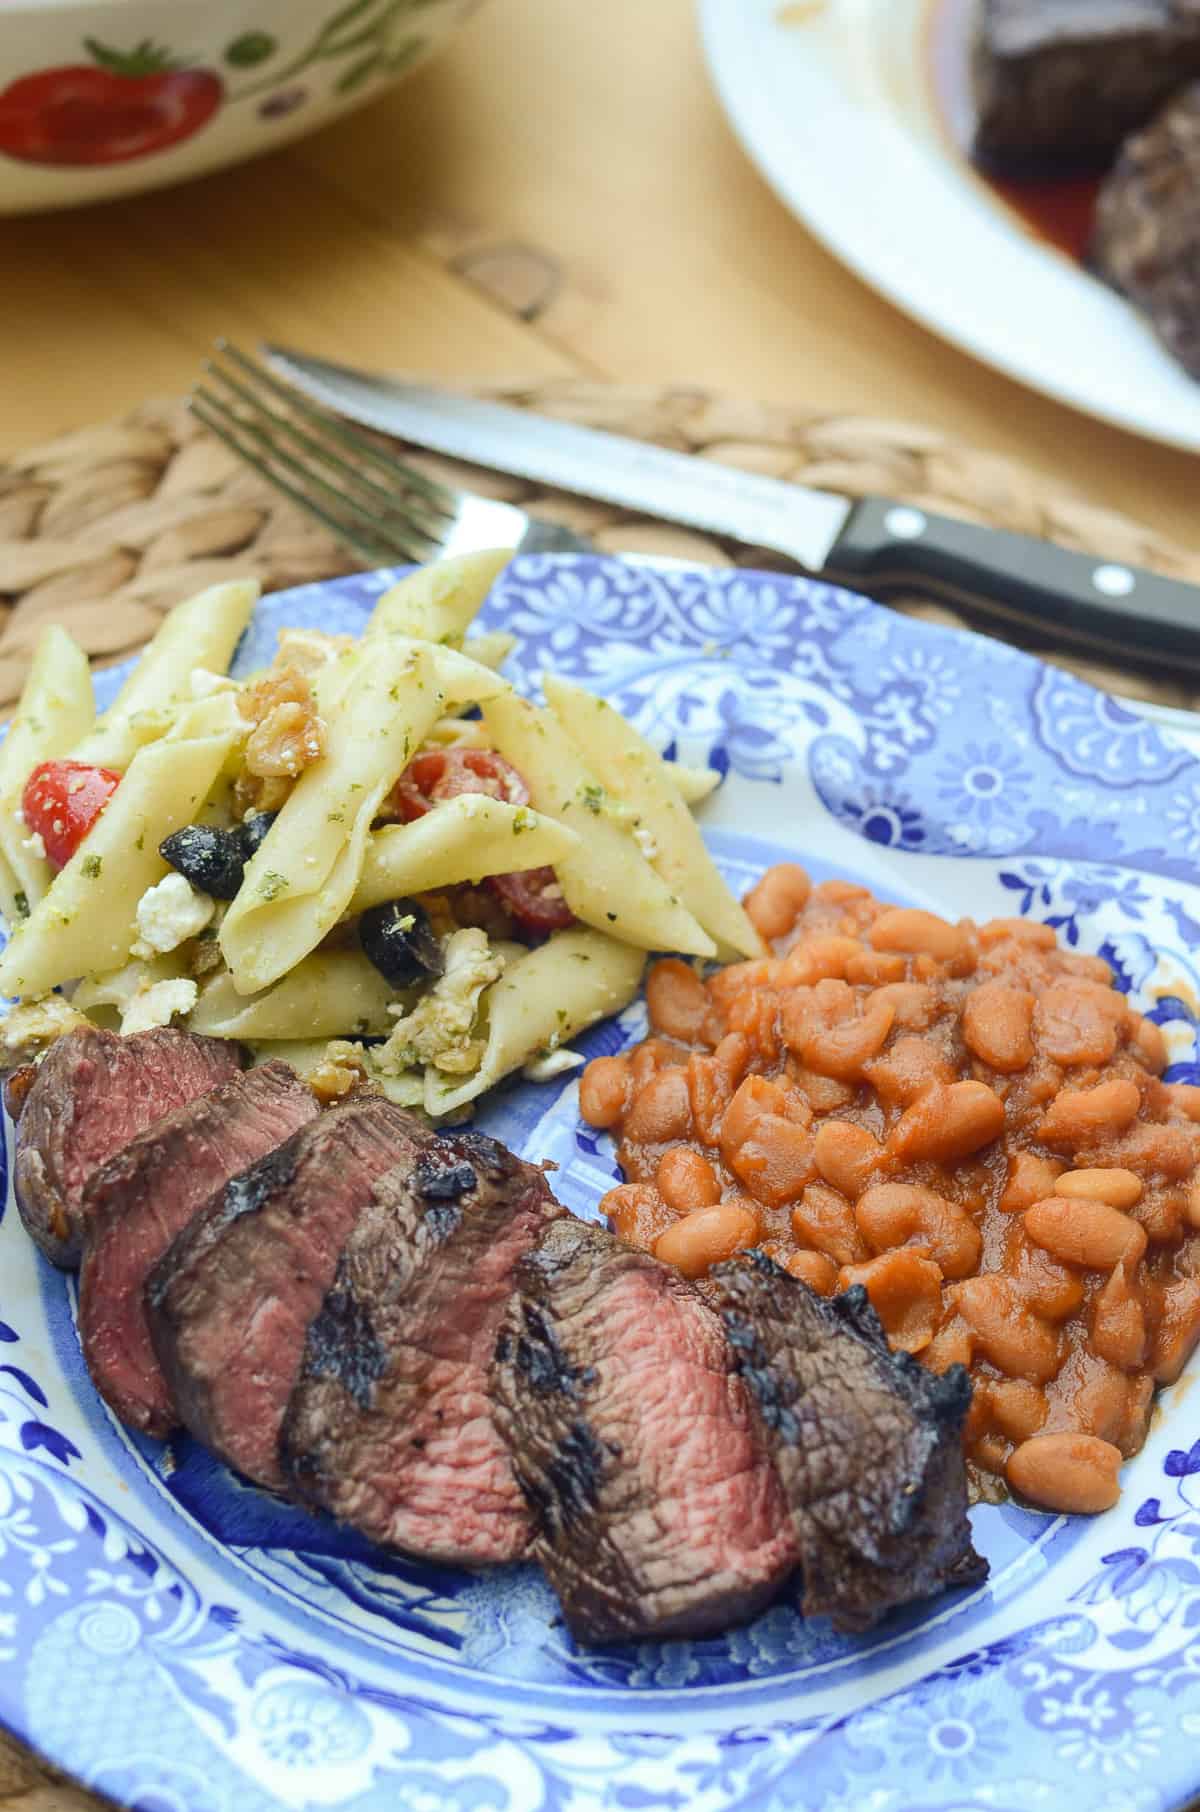 Sliced Whiskey Balsamic Steak on a blue plate with pasta and beans.